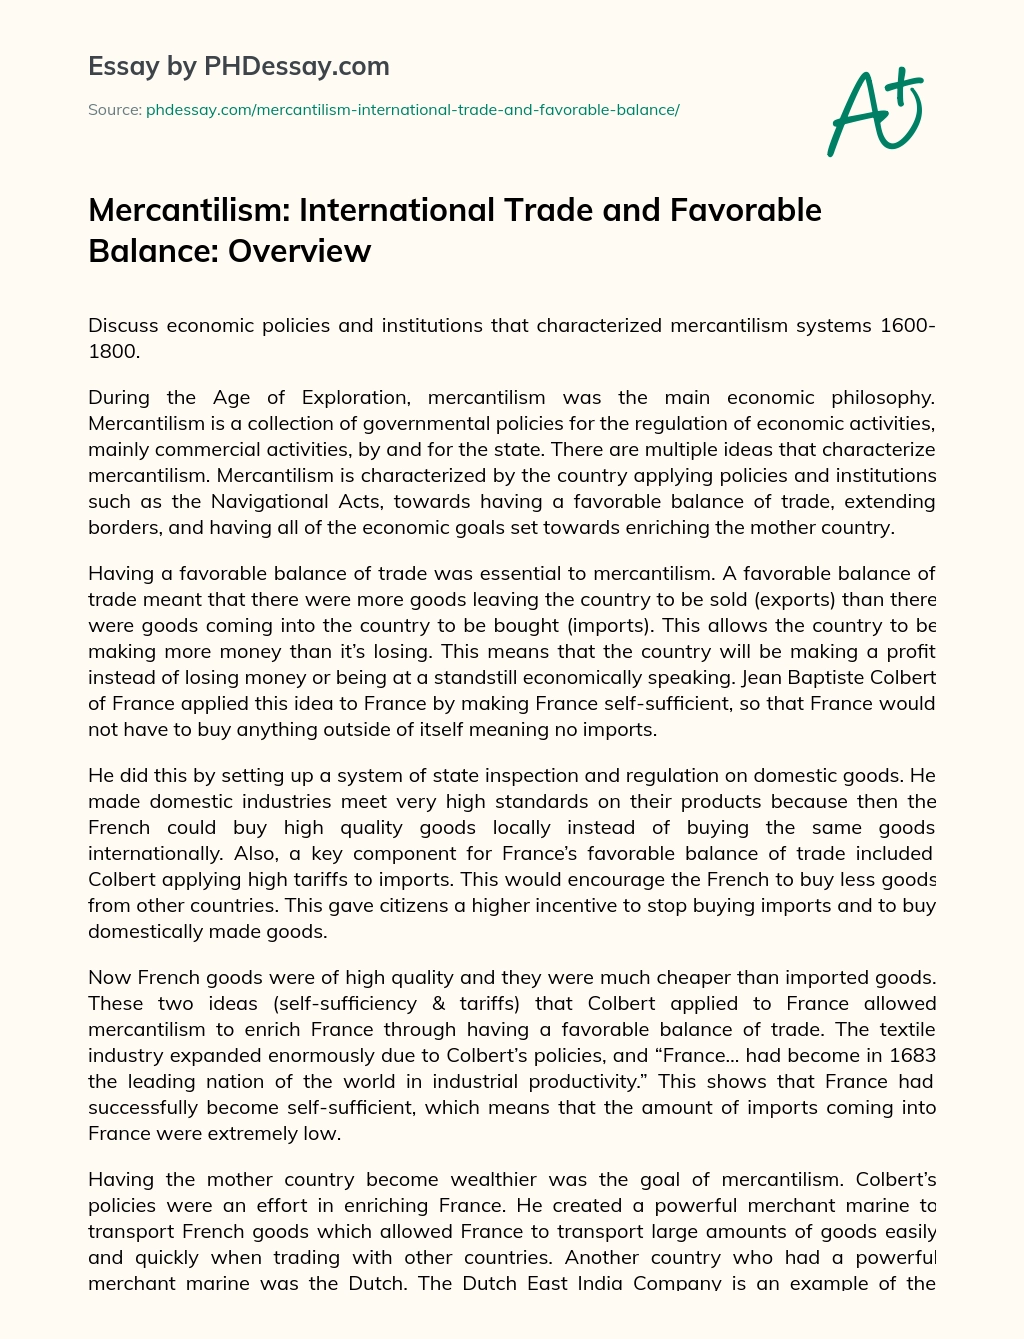 Mercantilism: International Trade and Favorable Balance: Overview essay